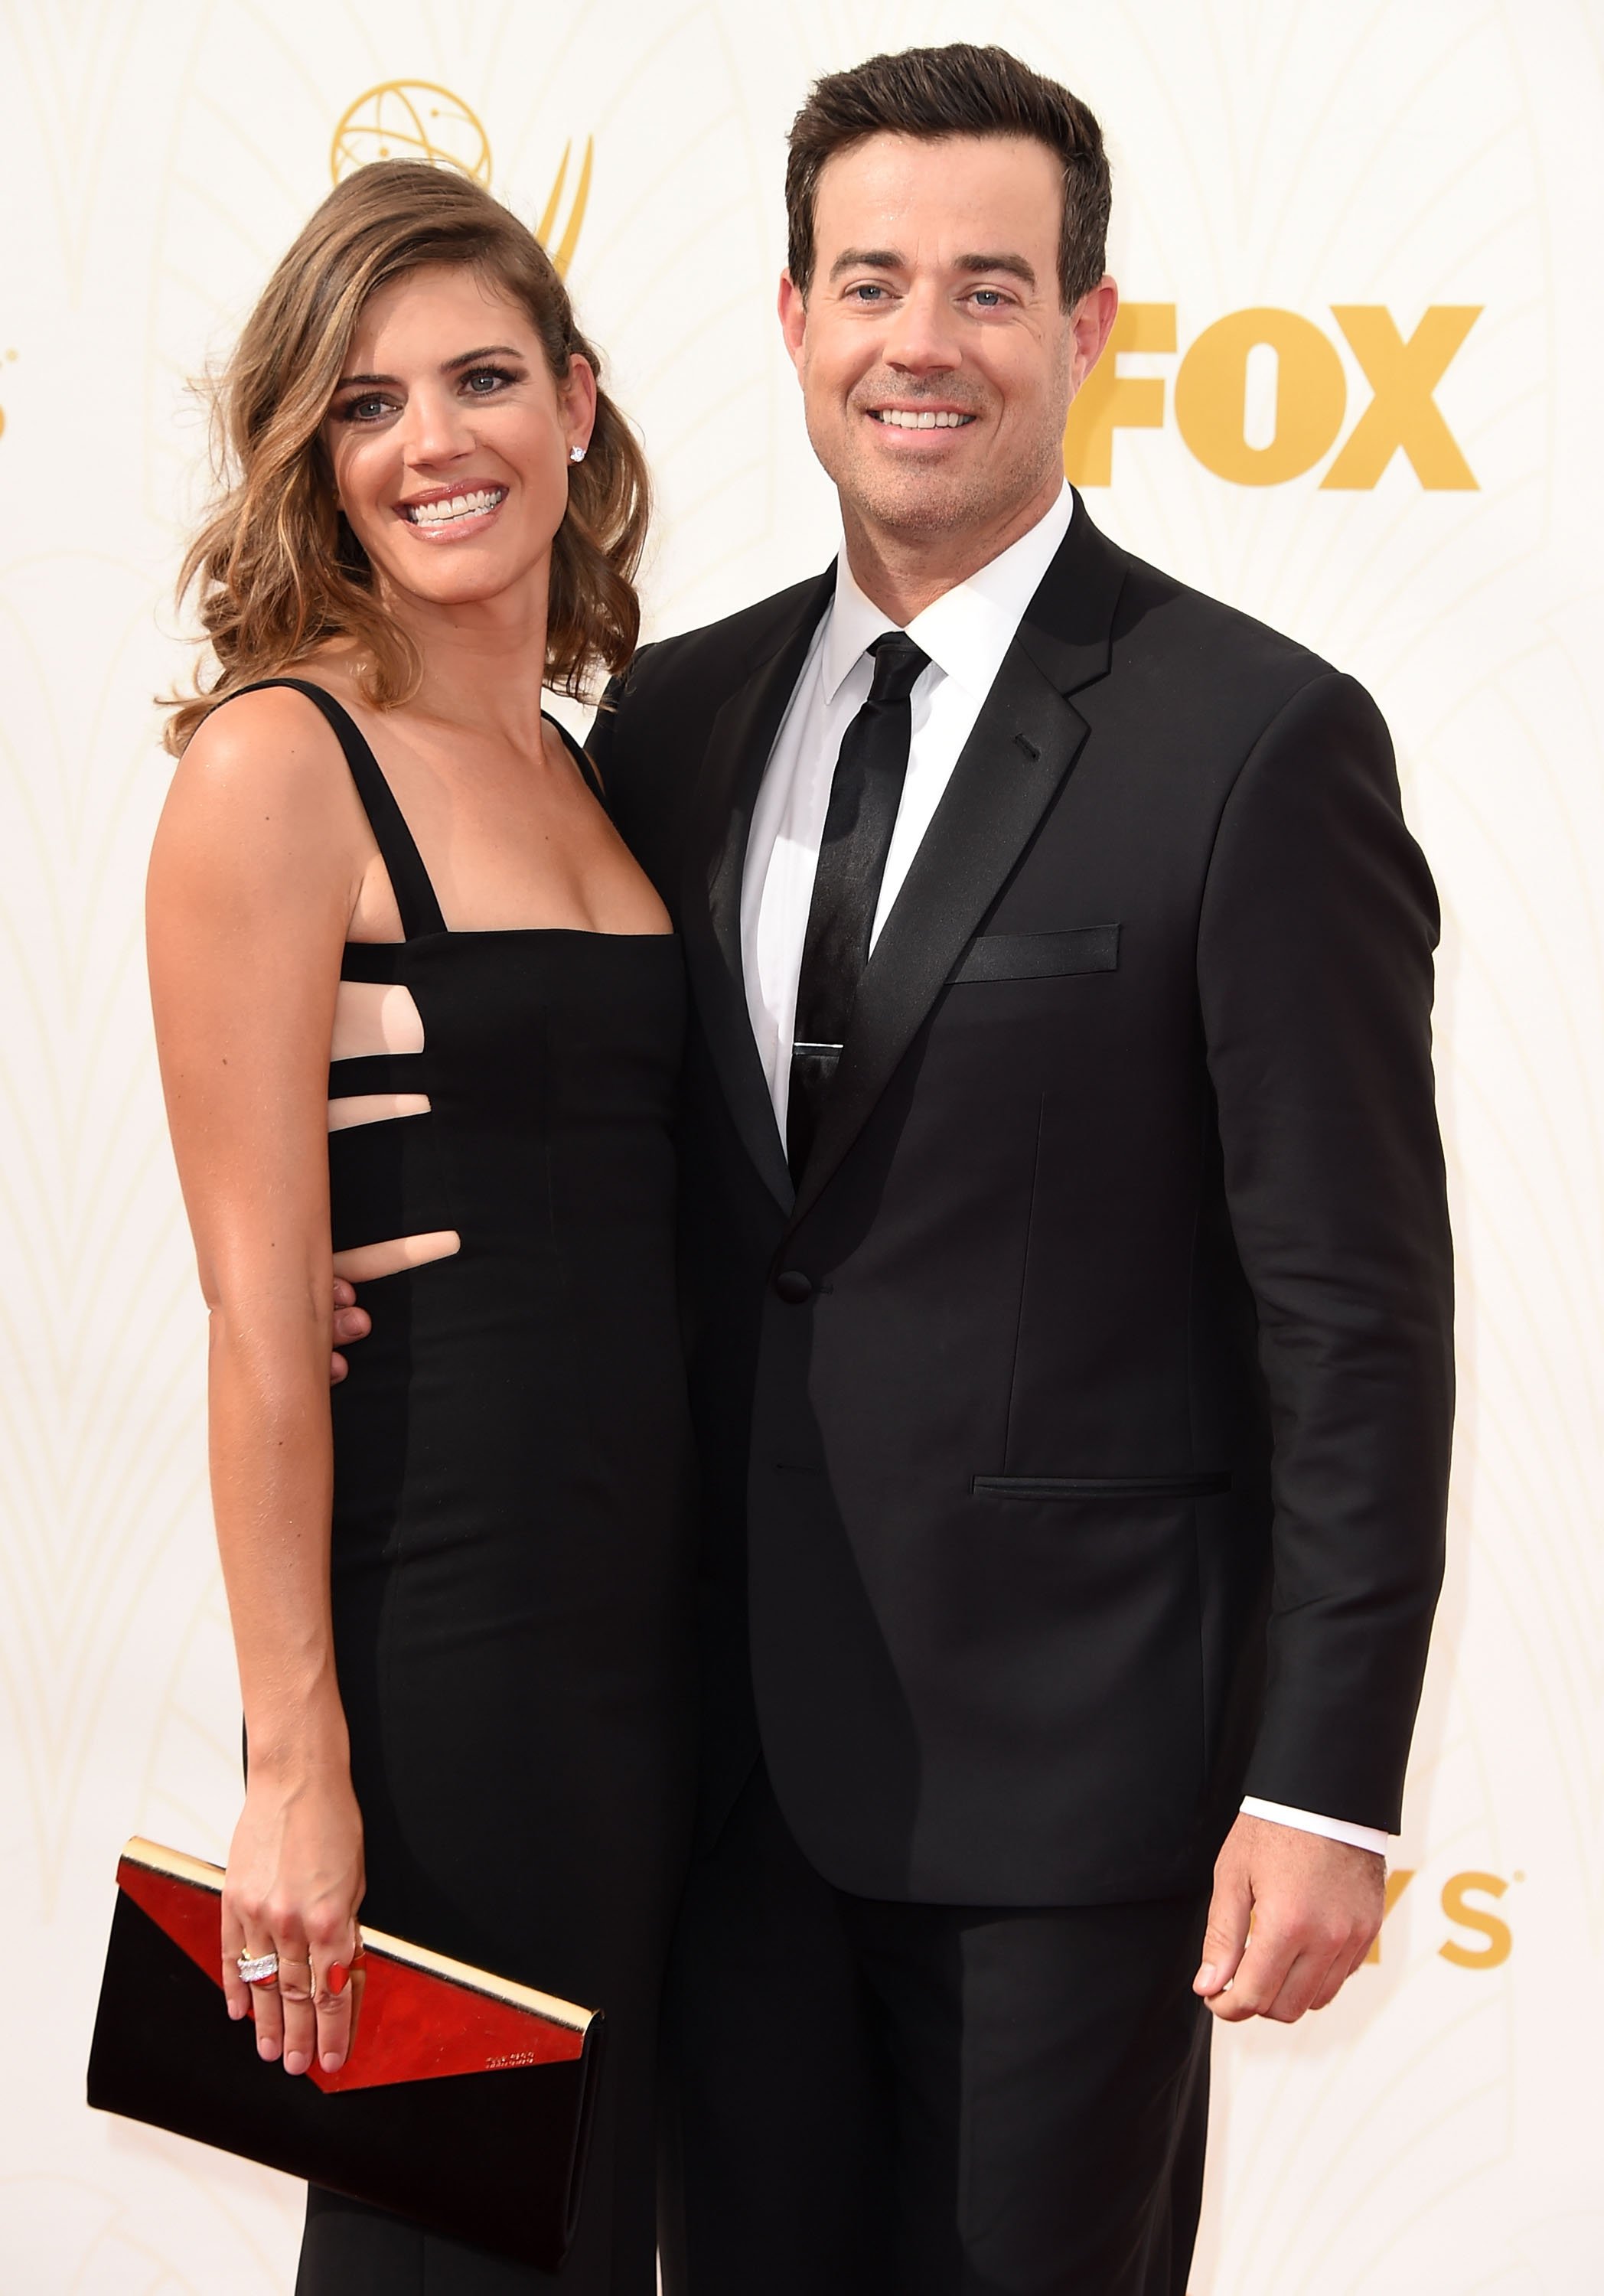 Siri Pinter and Carson Daly attend the 67th Annual Primetime Emmy Awards on September 20, 2015 in Los Angeles, California. | Source: Getty Images